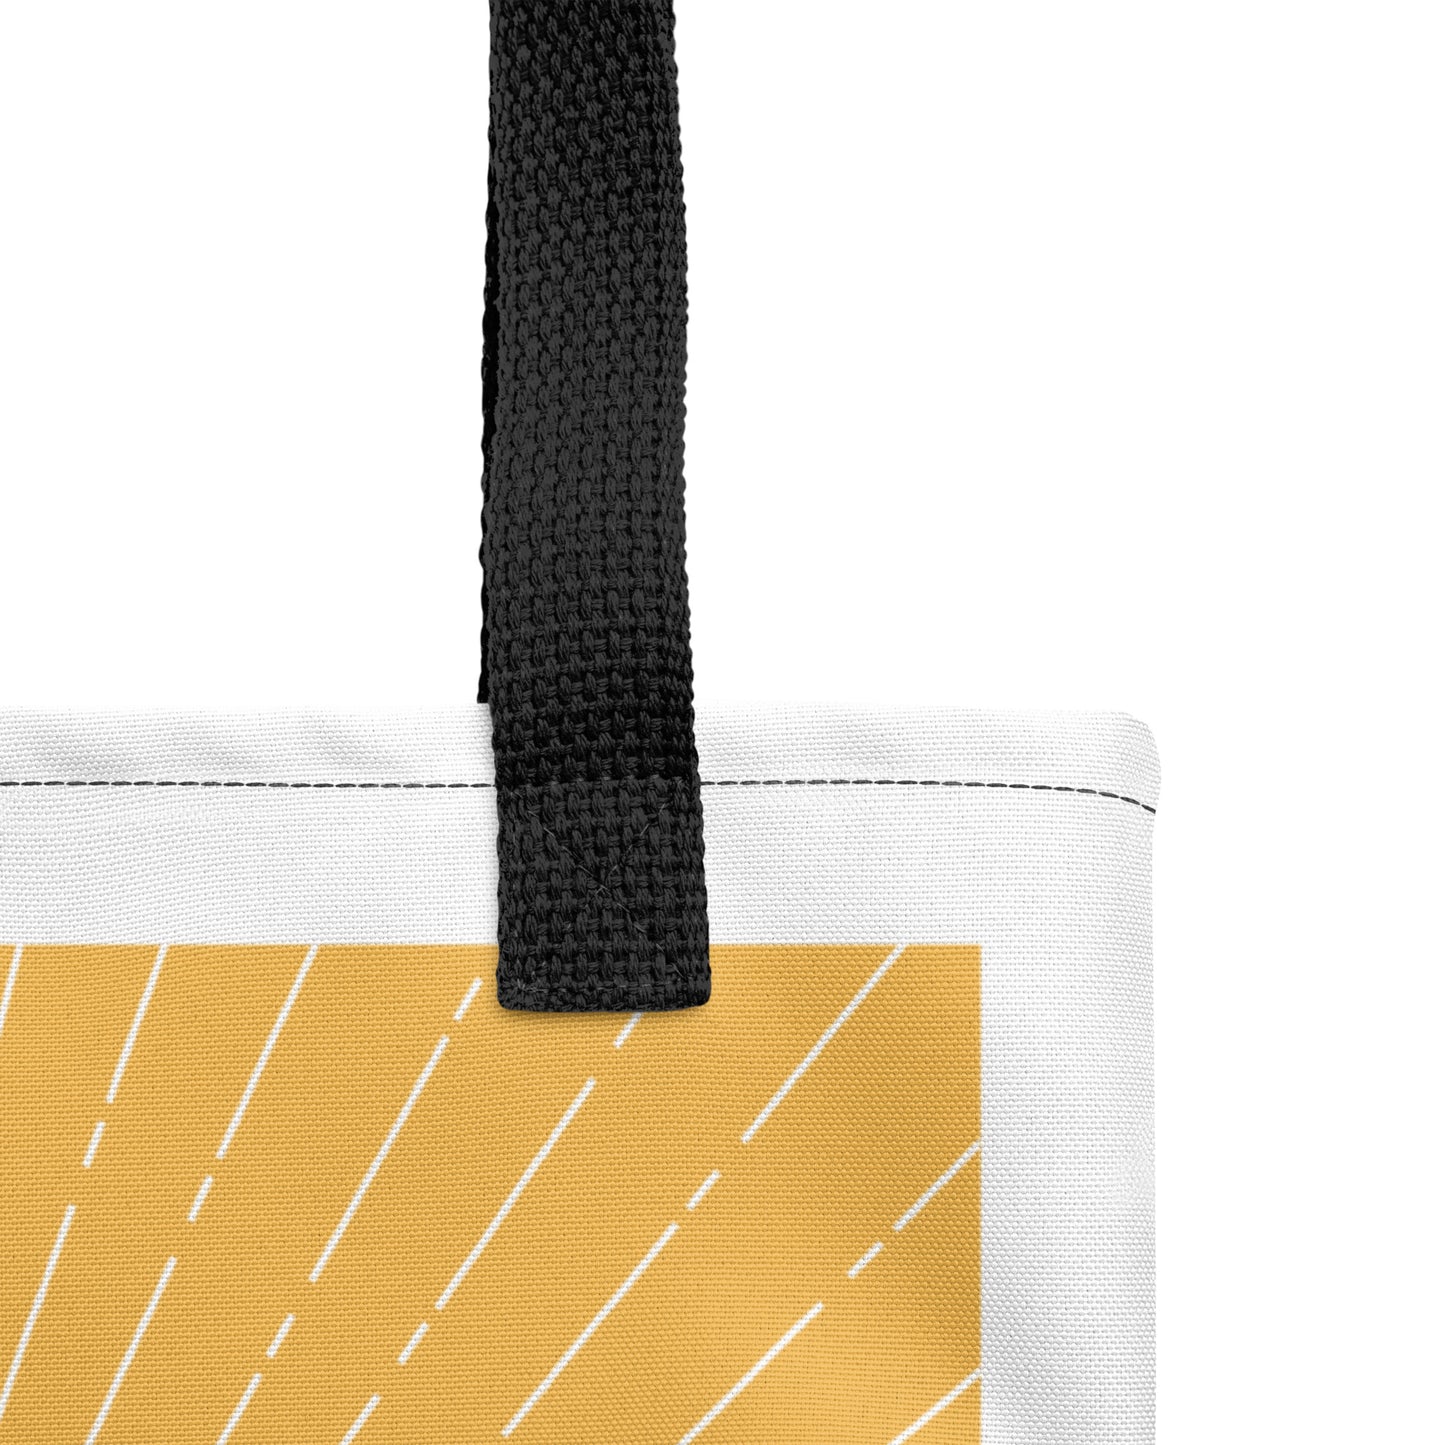 'If You See It In The Sun' Tote Bag